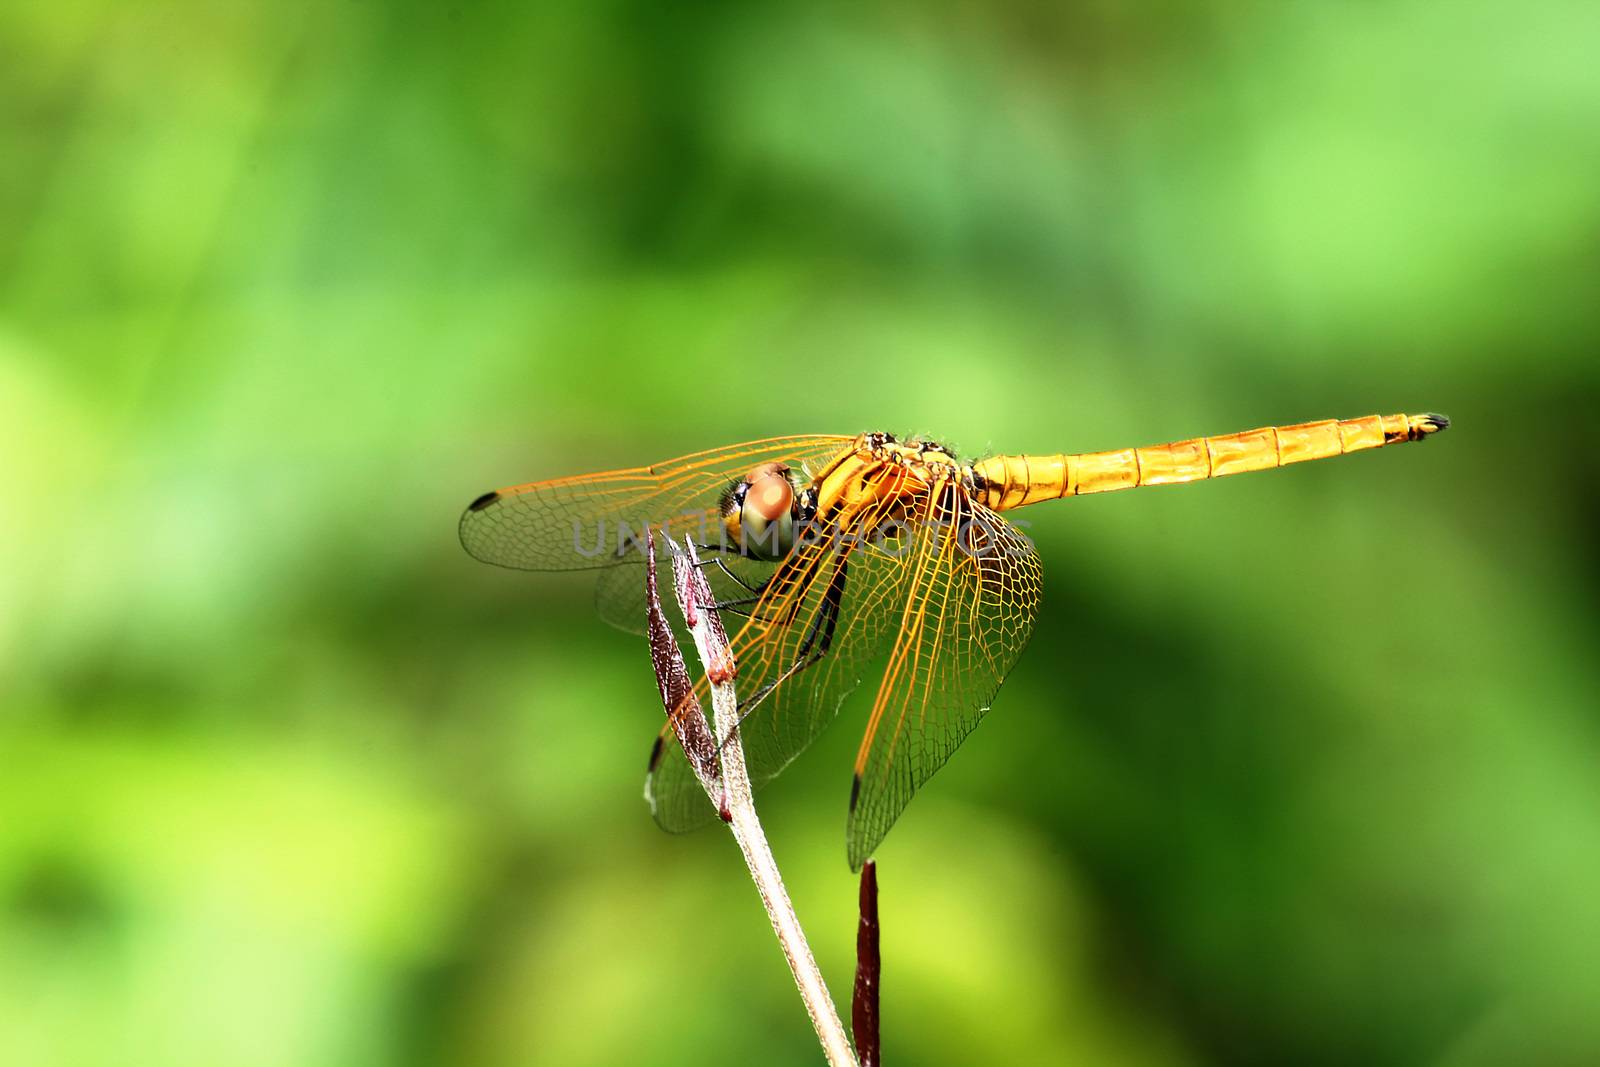 Dragonfly on yellow wings on a branch